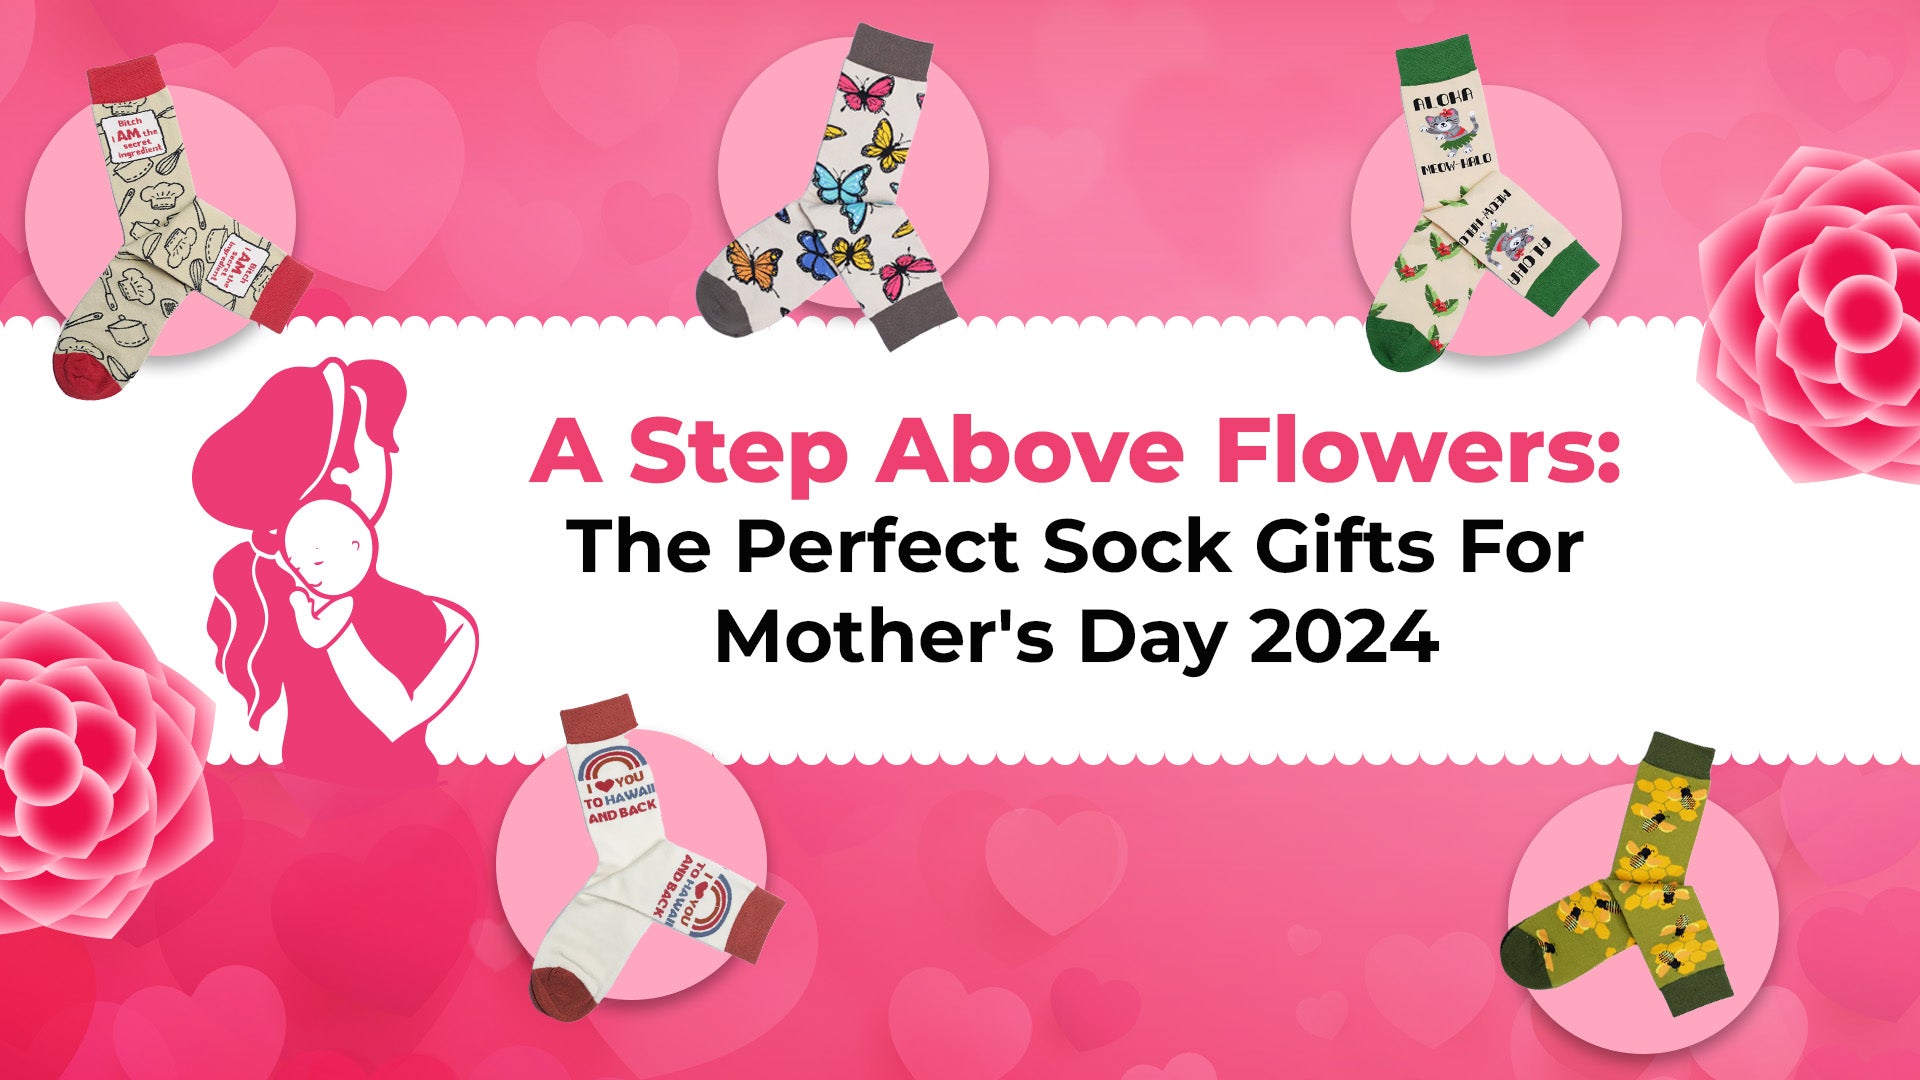 A Step Above Flowers The Perfect Sock Gifts For Mother's Day 2024